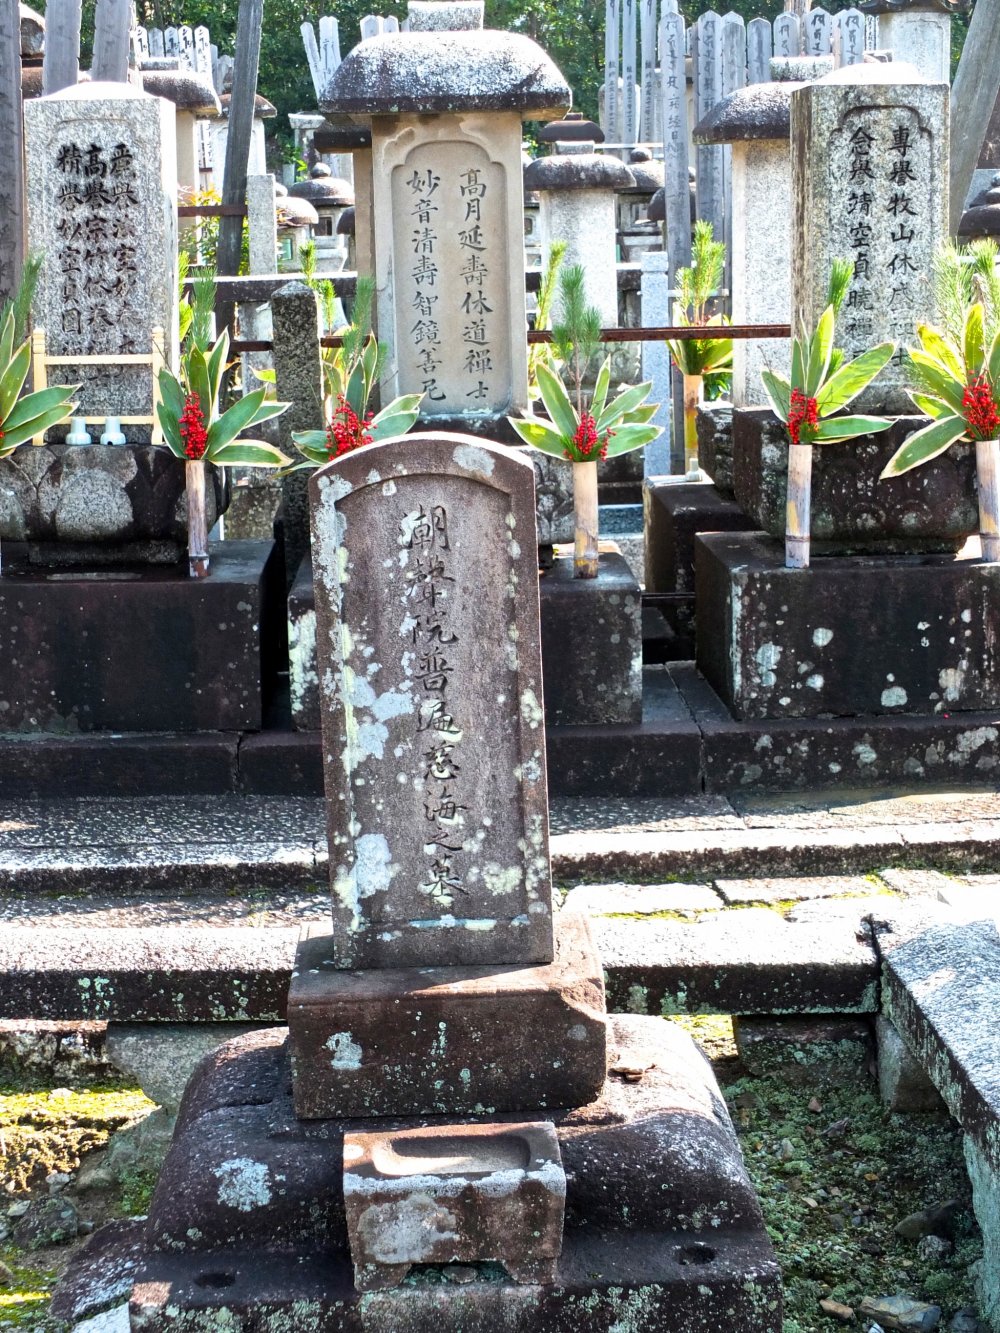 Some old gravestones, inside the temple cemetery